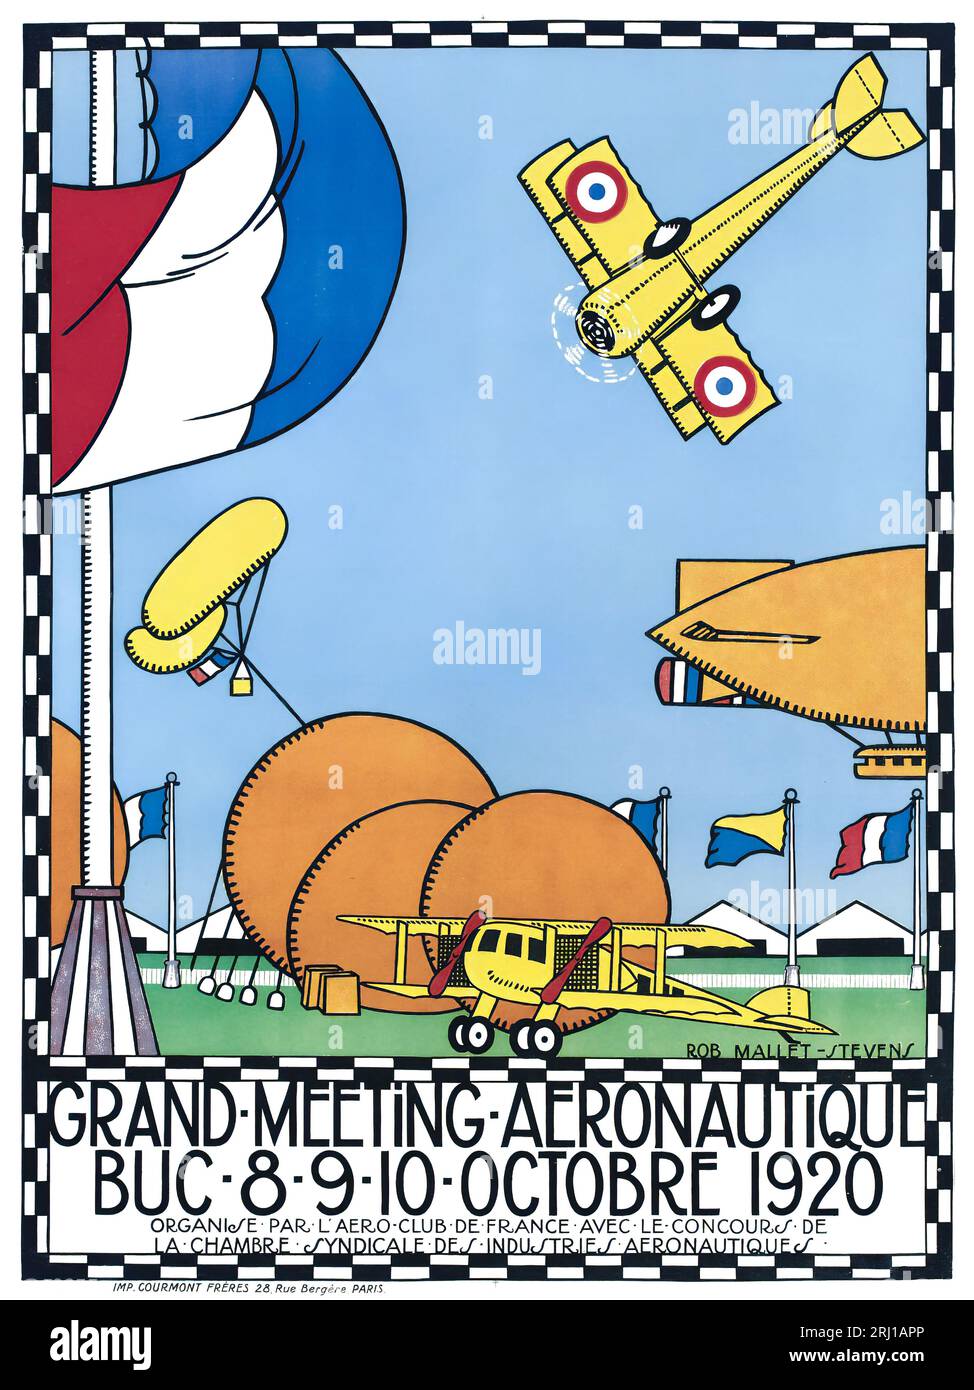 1920 Vintage Aeronautical meet-up poster by Rob Mallet-Stevens. Stock Photo